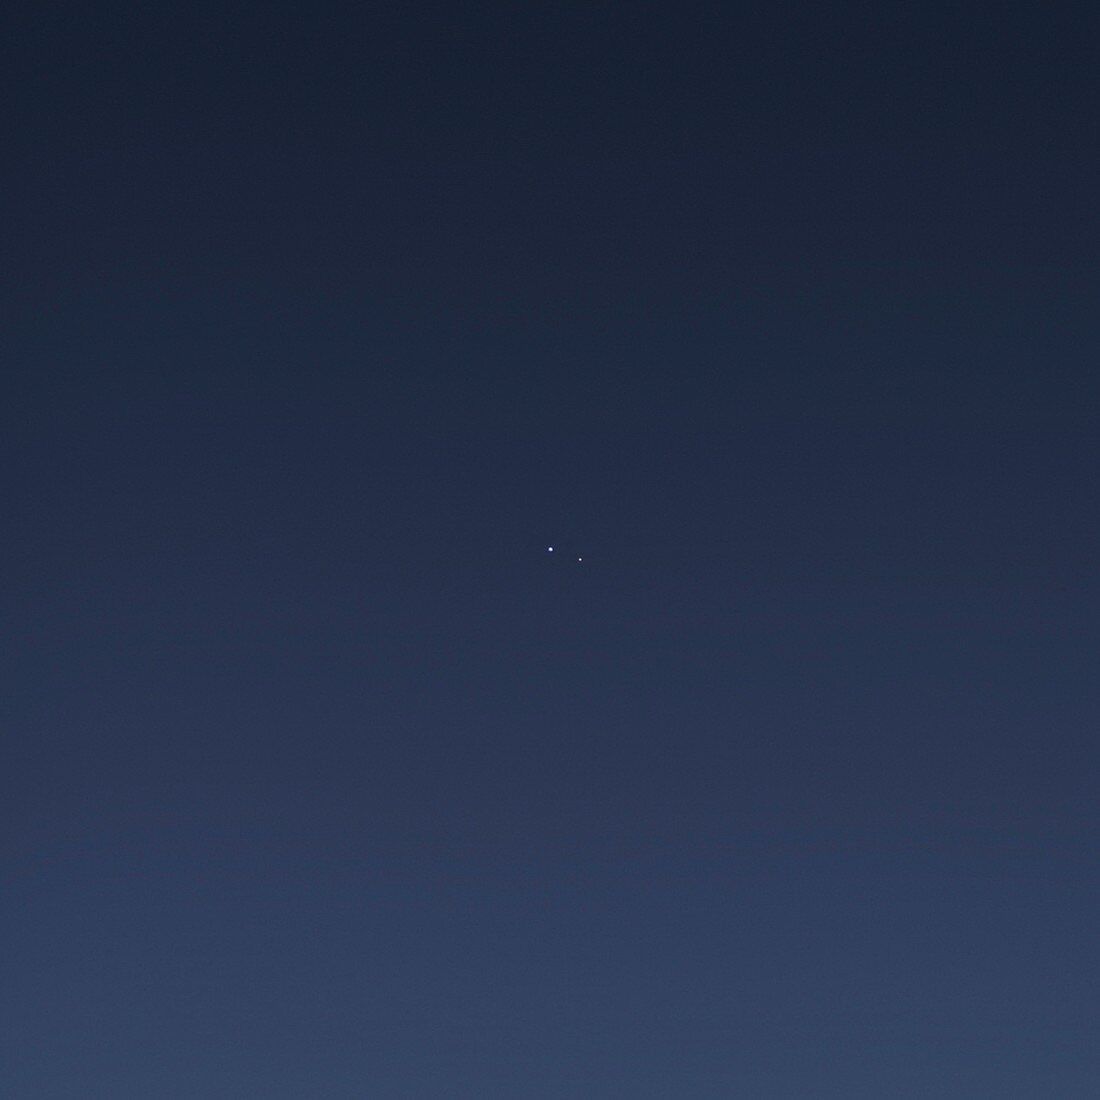 Earth and Moon from Saturn,Cassini image